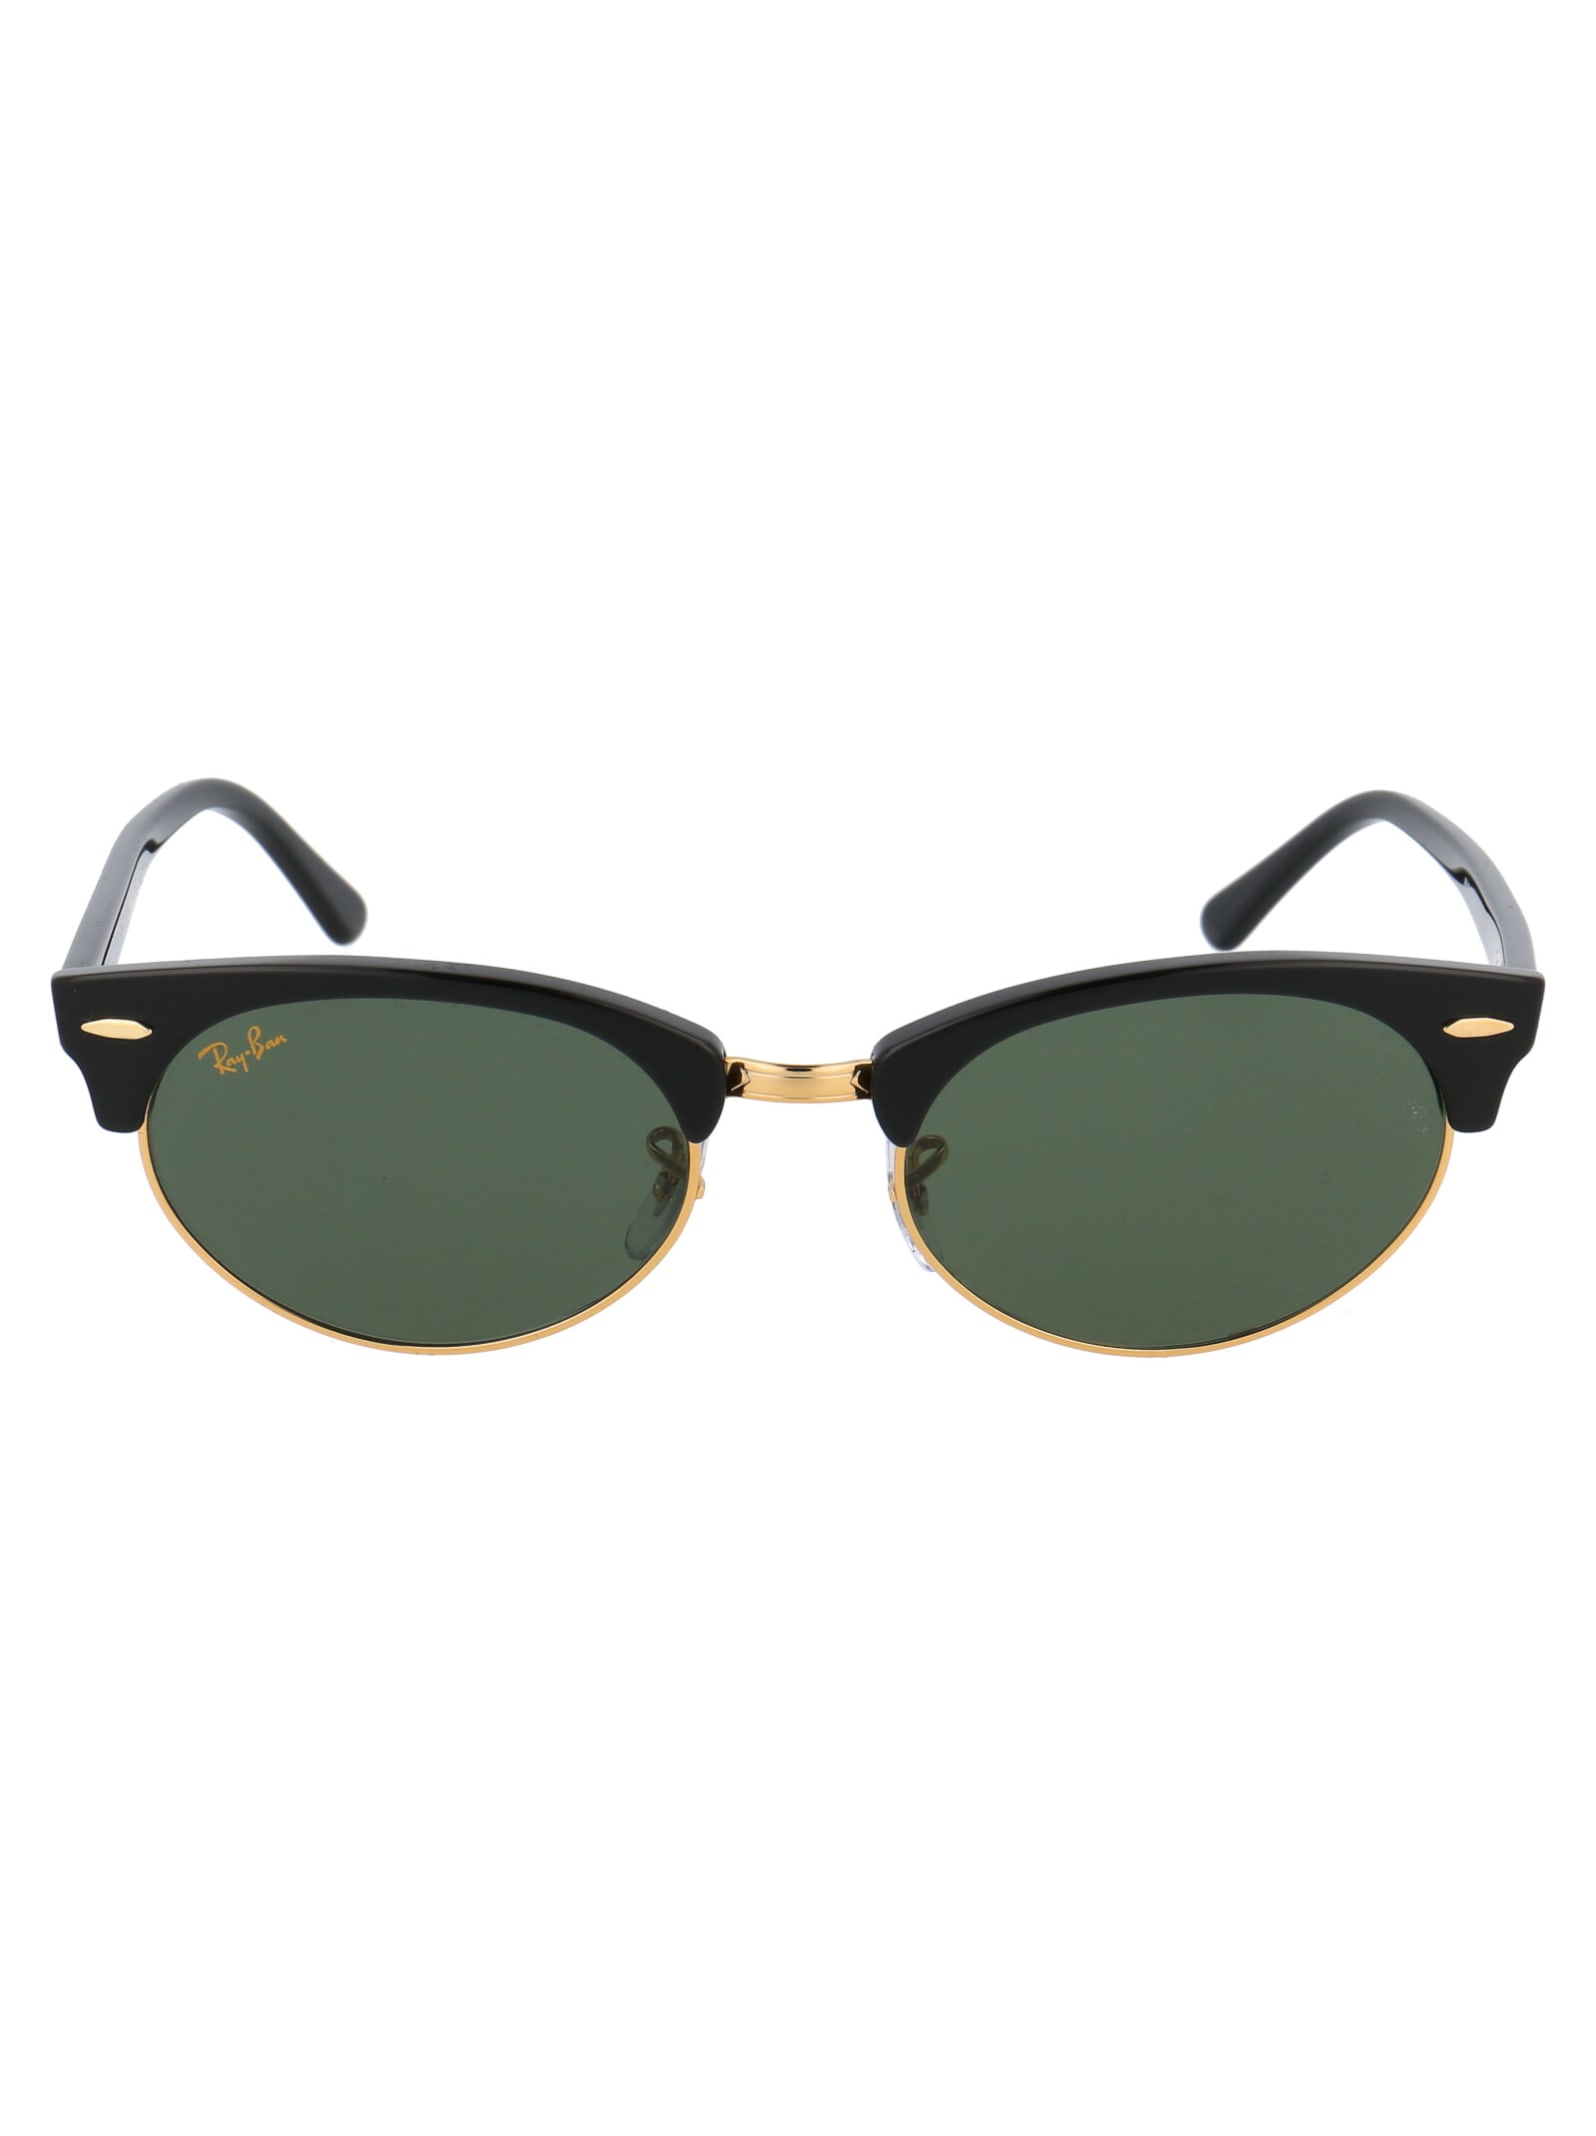 Ray-Ban Clubmaster Oval Sunglasses